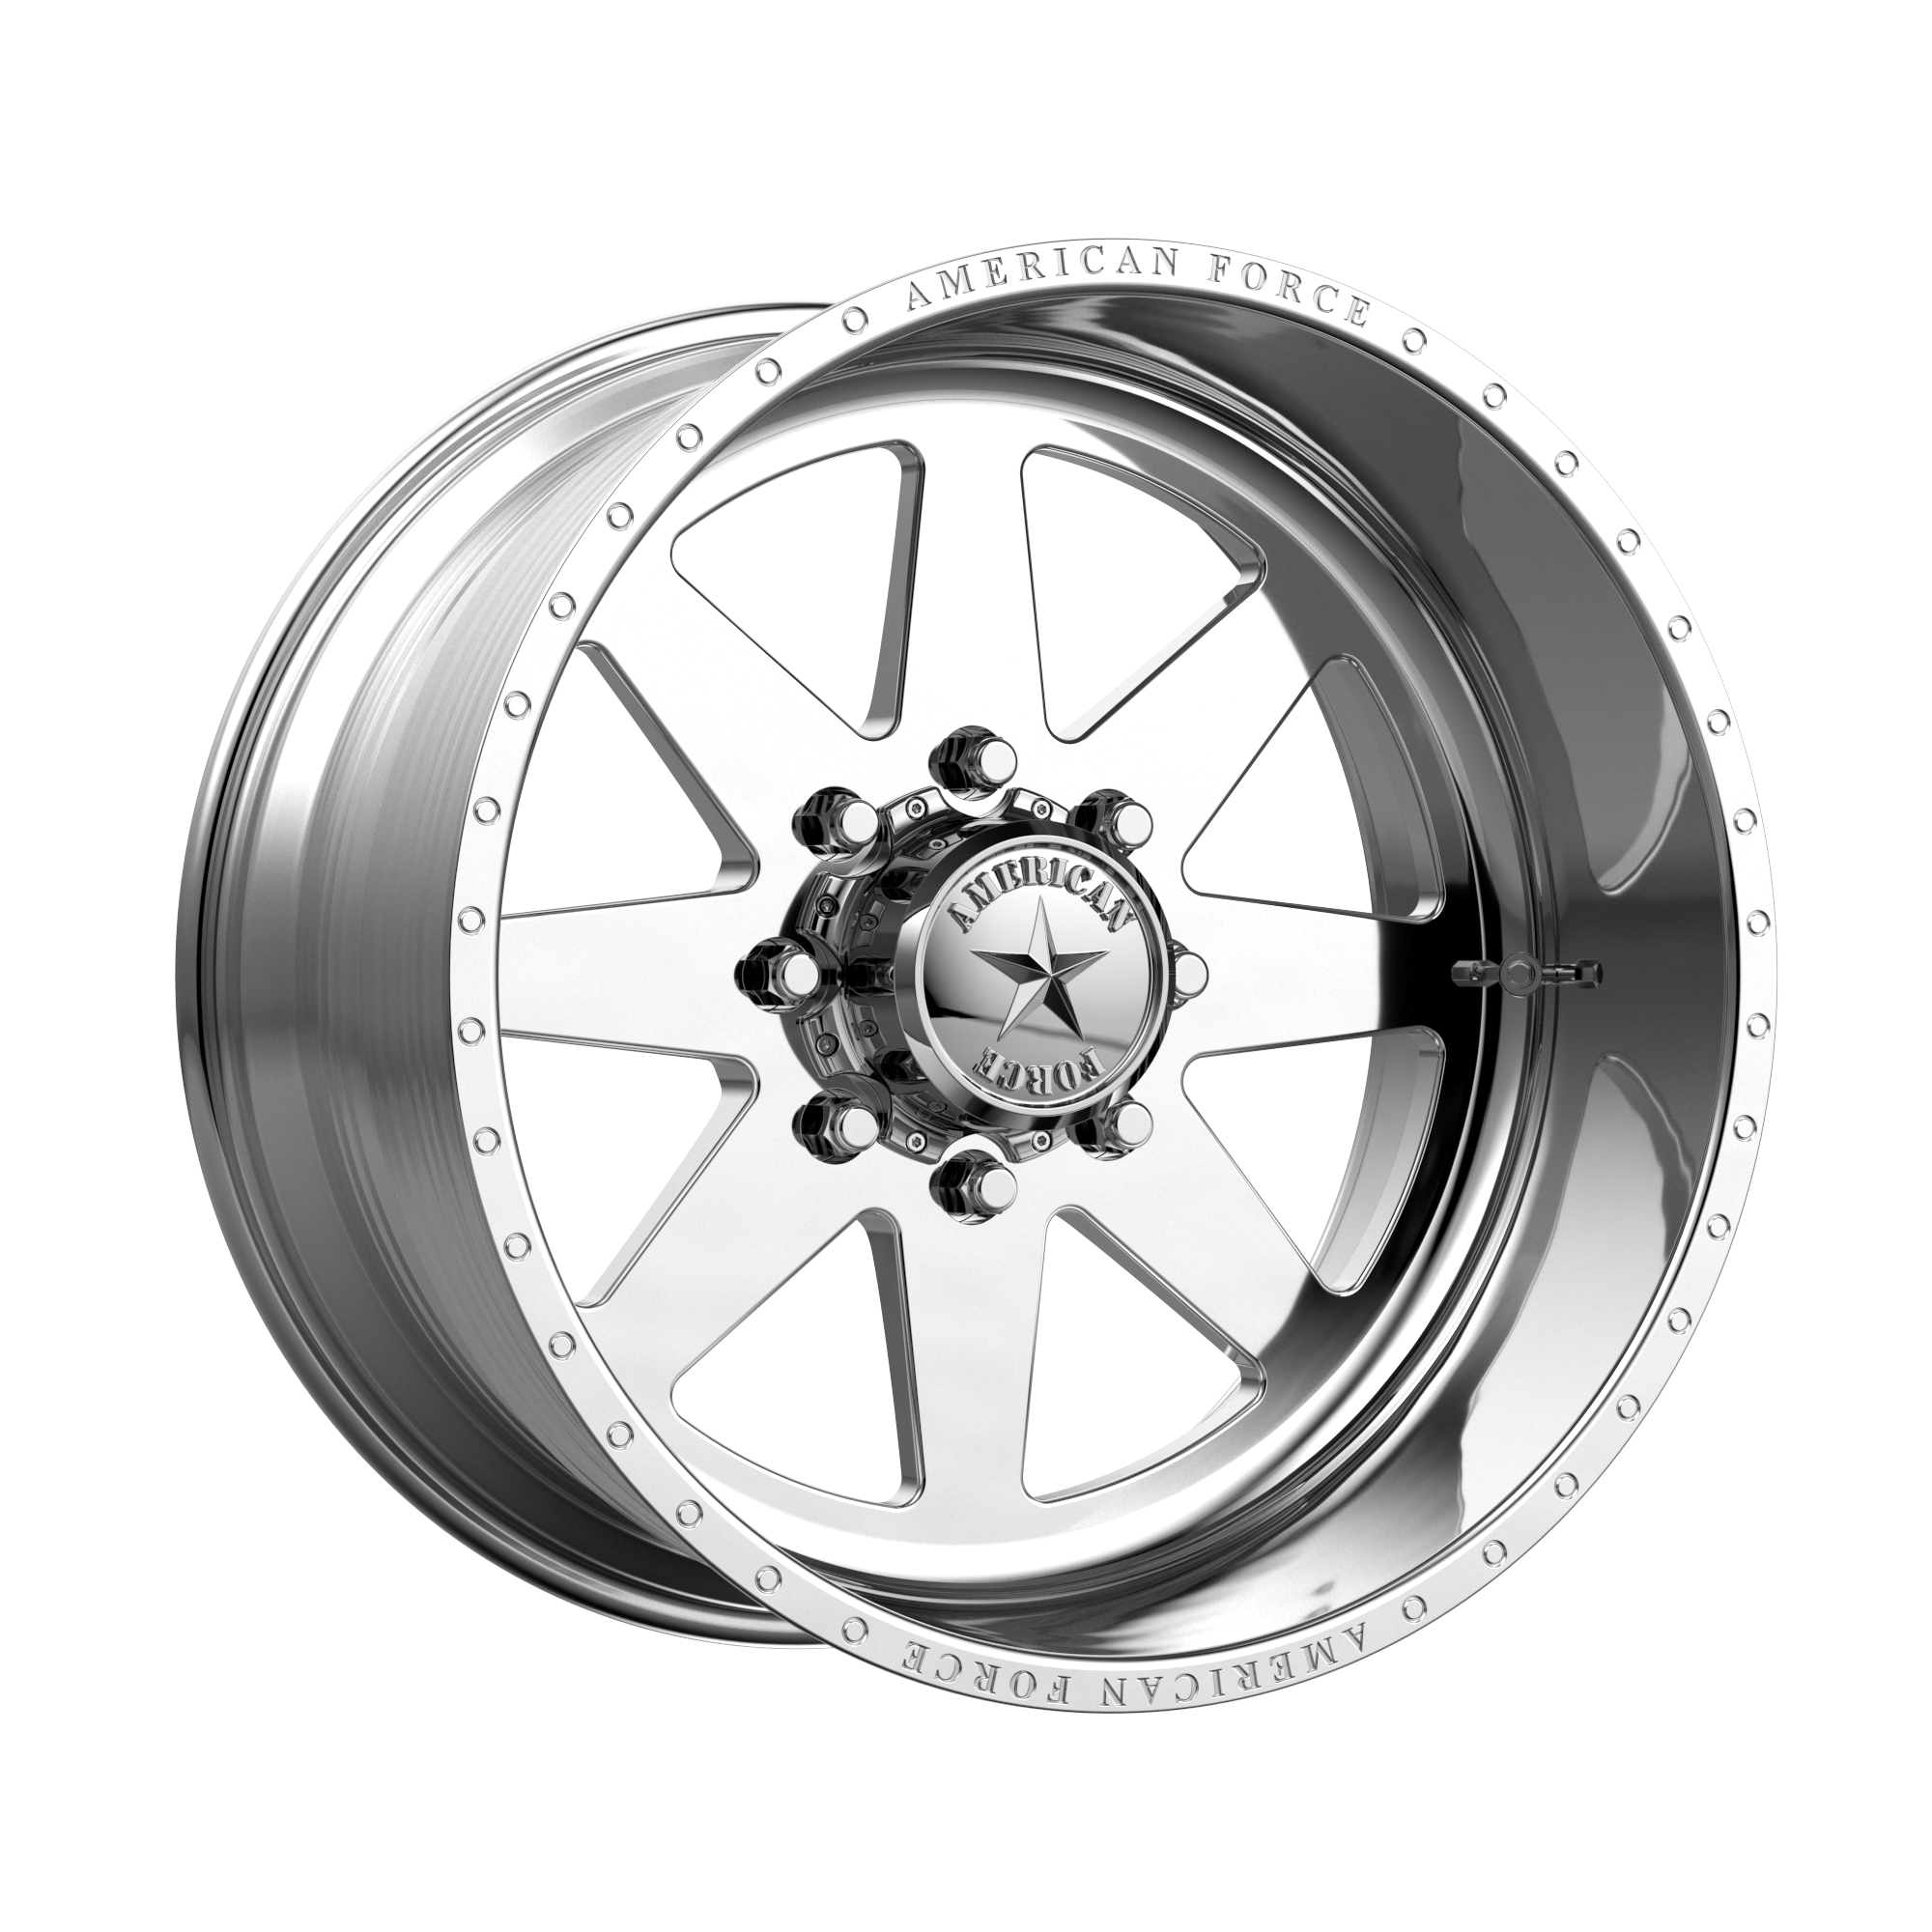 INDEPENDENCE SS 26x16 6x139.70 POLISHED (-101 mm) - Tires and Engine Performance